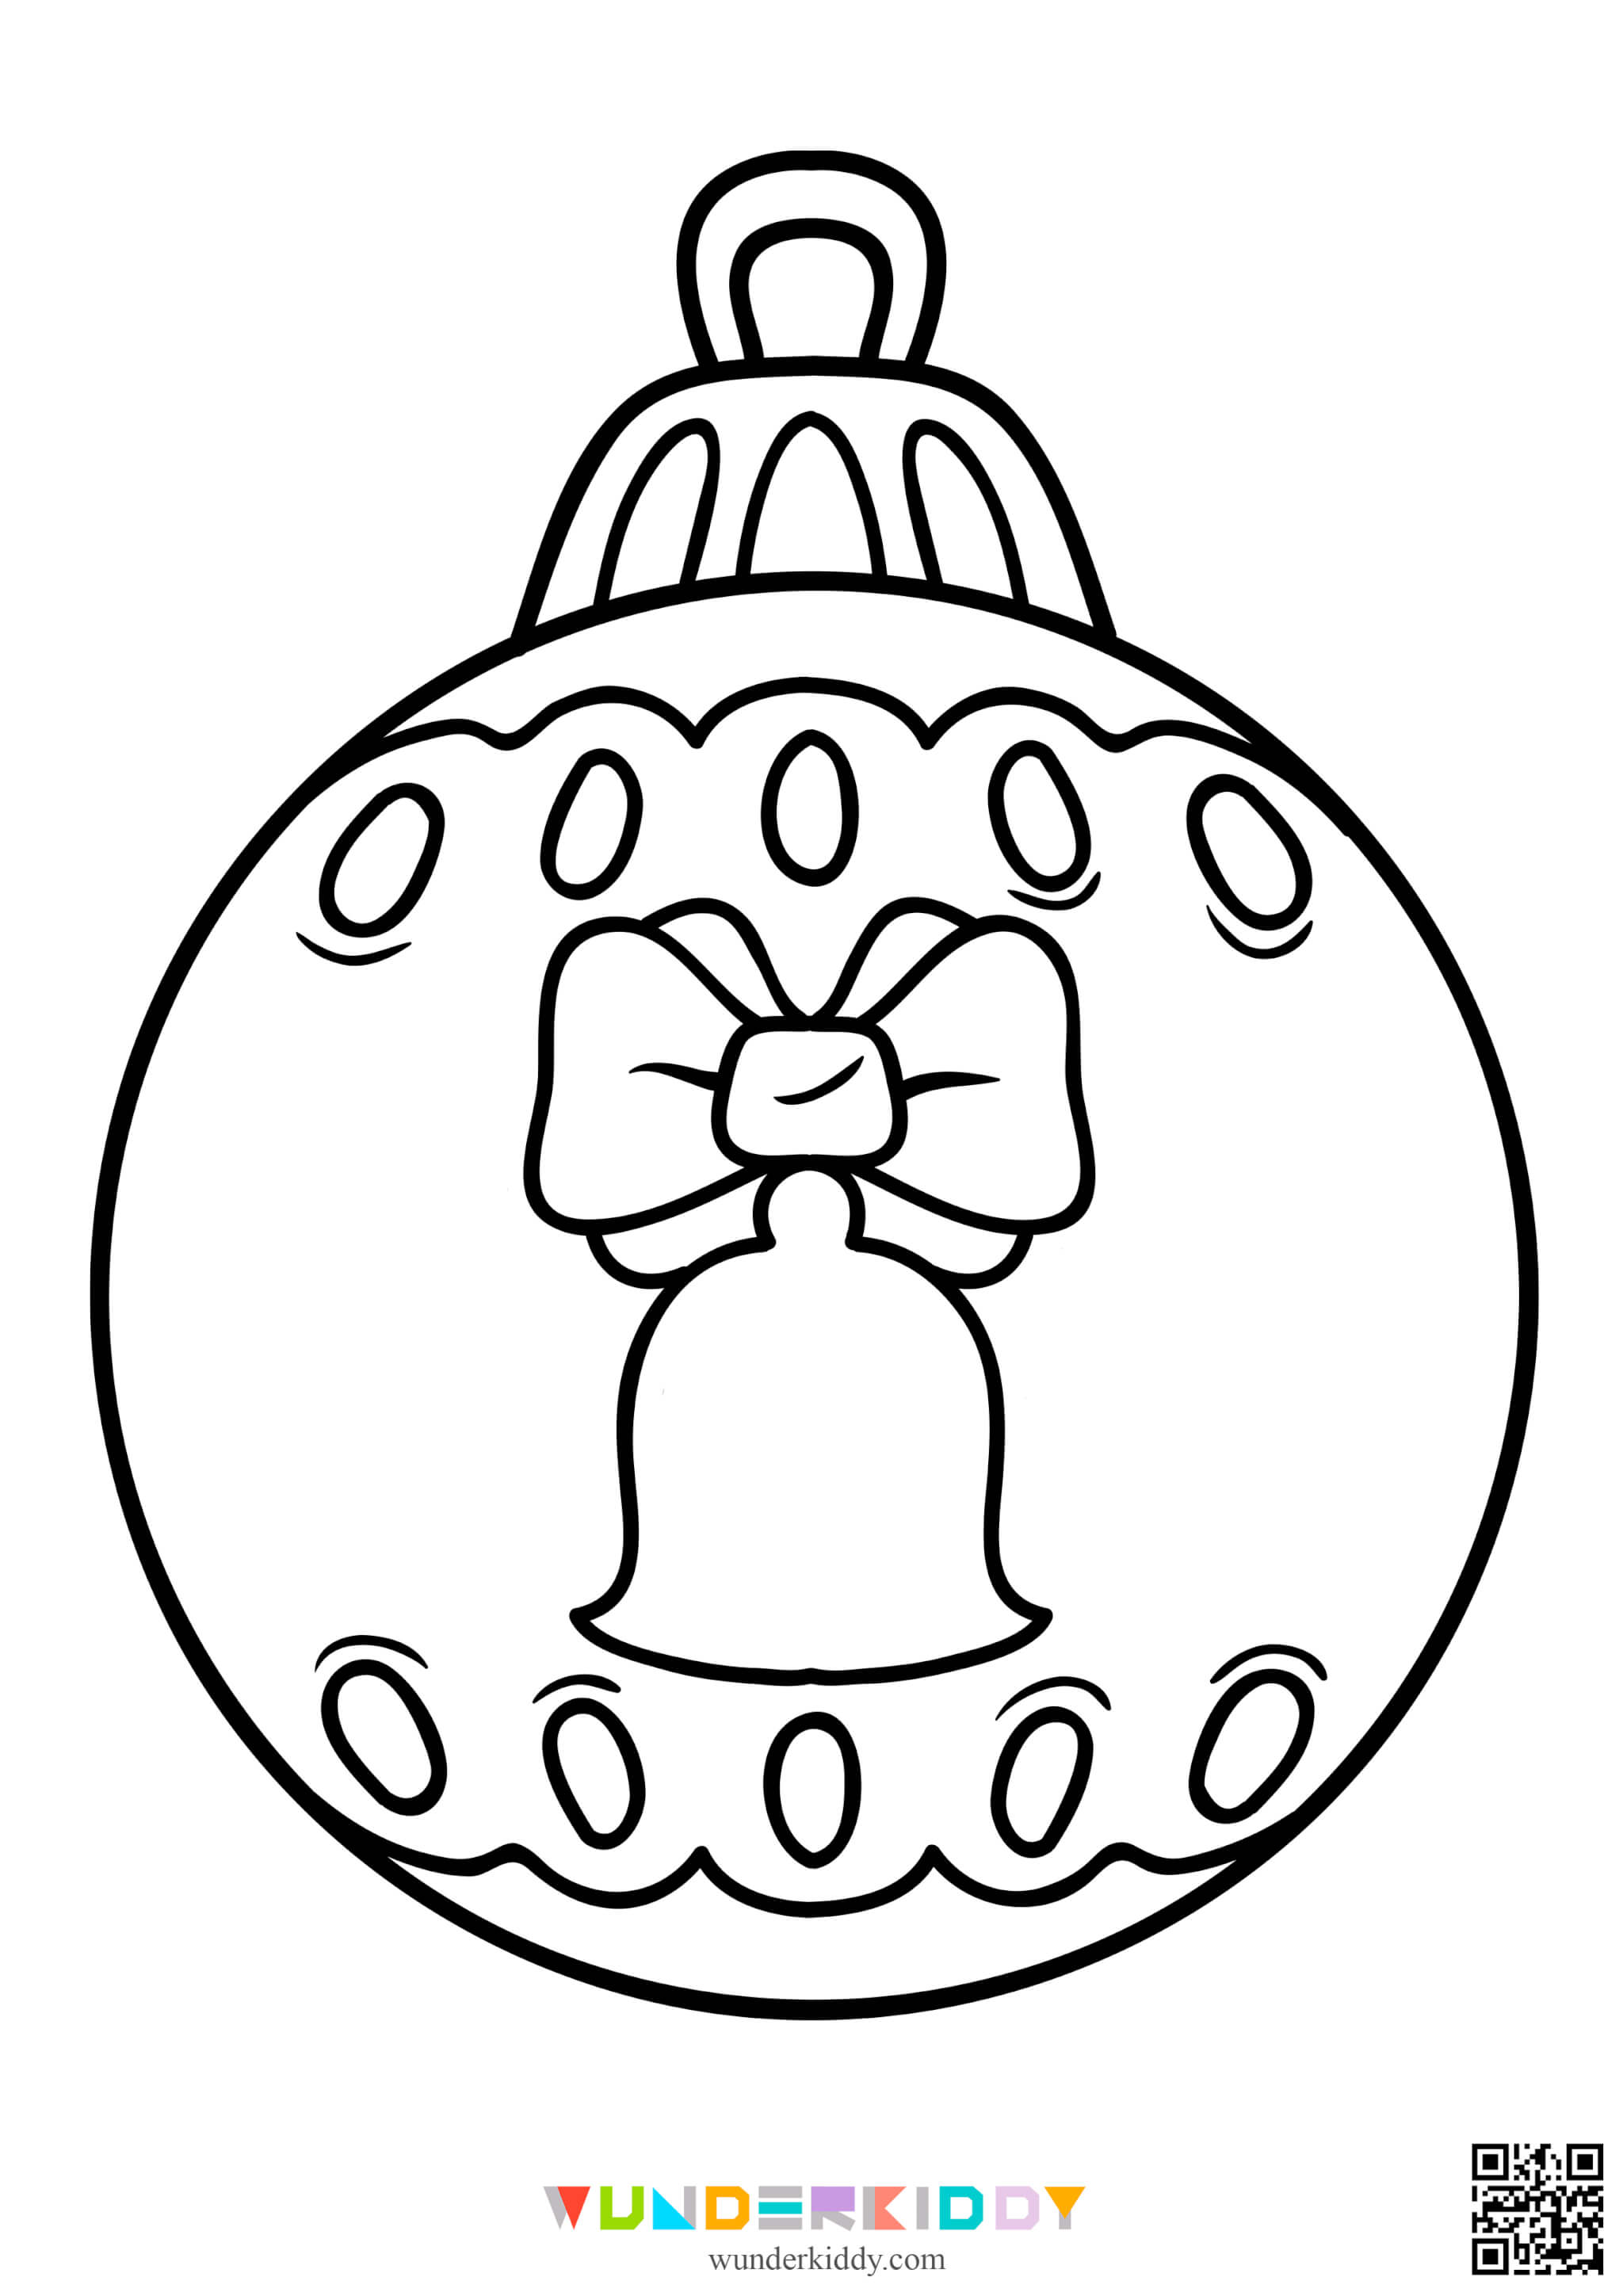 Christmas Ornament Coloring Pages - Image 15